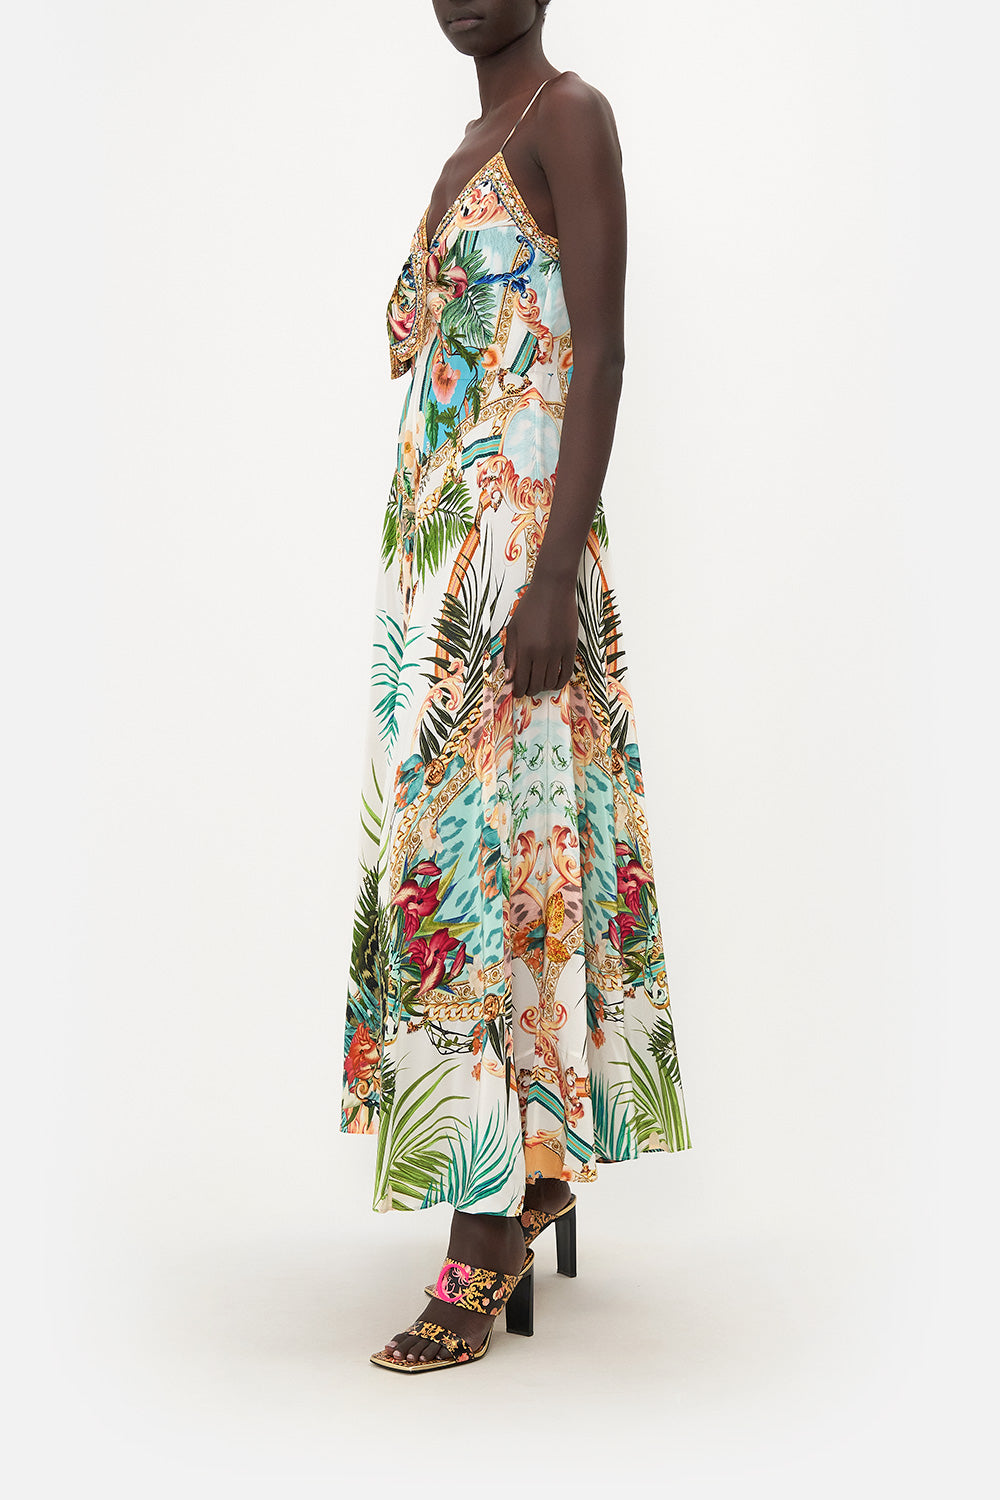 Camilla Long Dress with Tie Front, Royalty Loyalty Silk Floral Dress